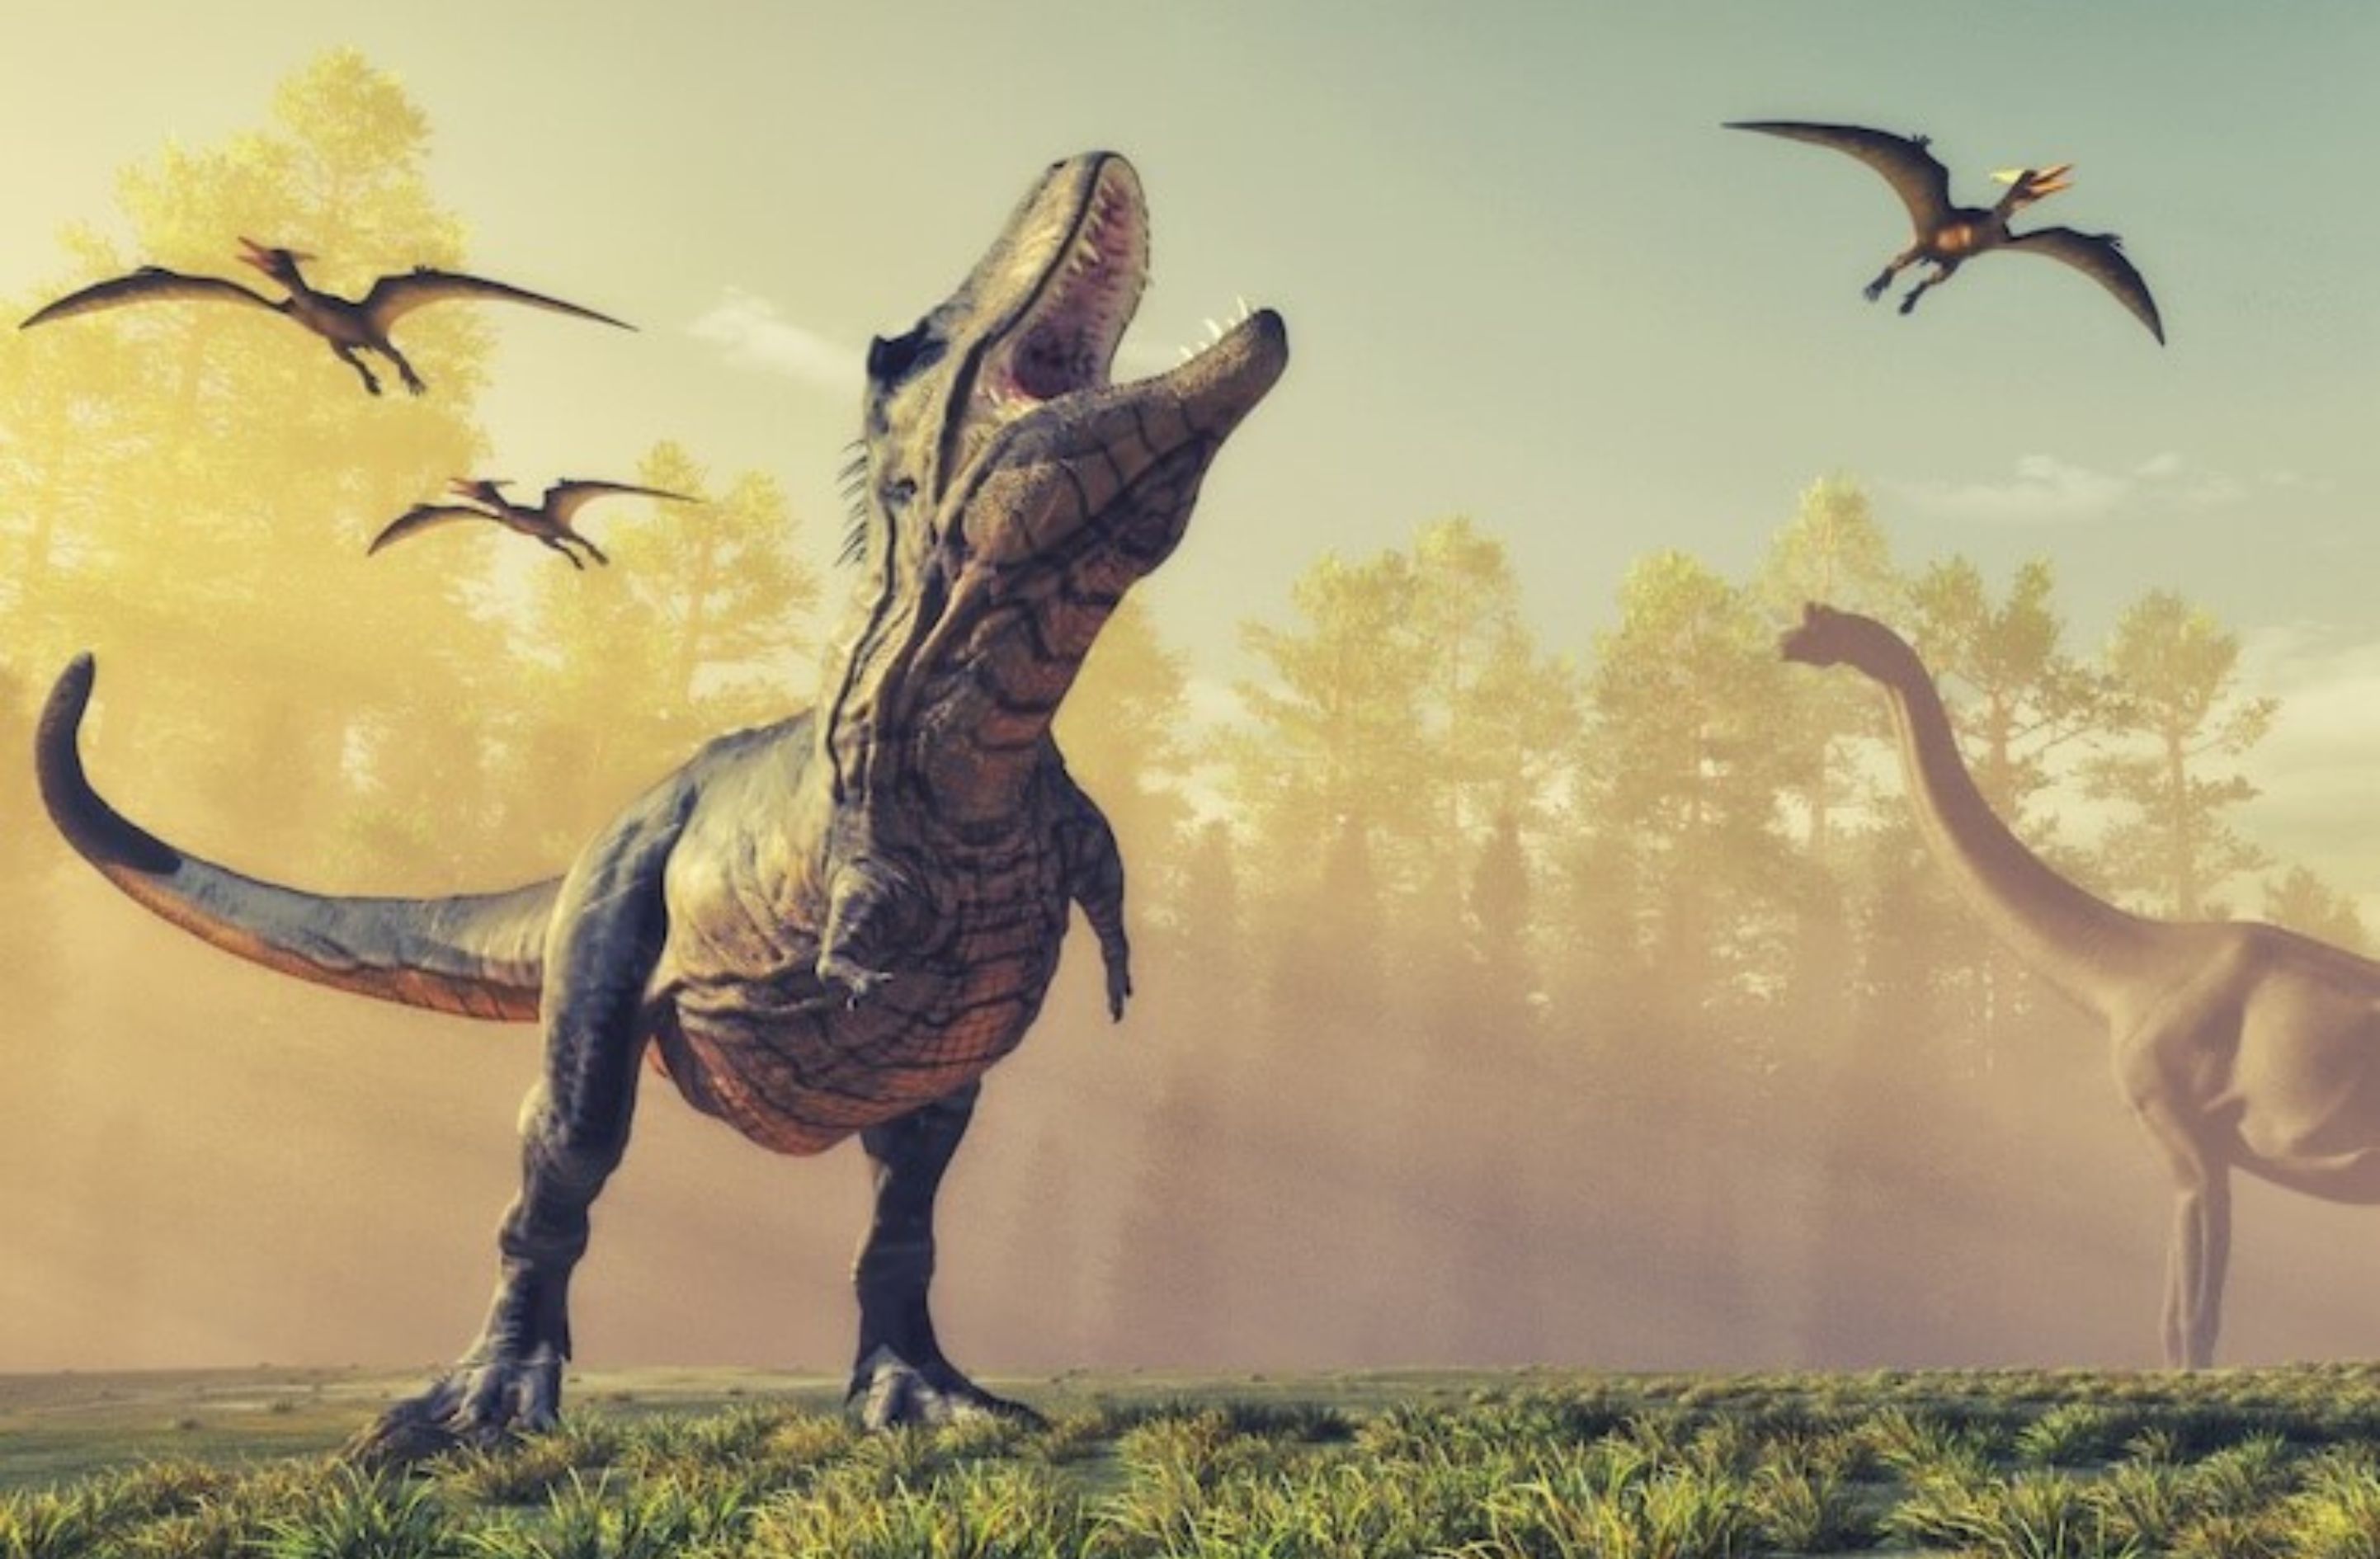 Dinosaurs & Dragons:  Where Myth Meets Science